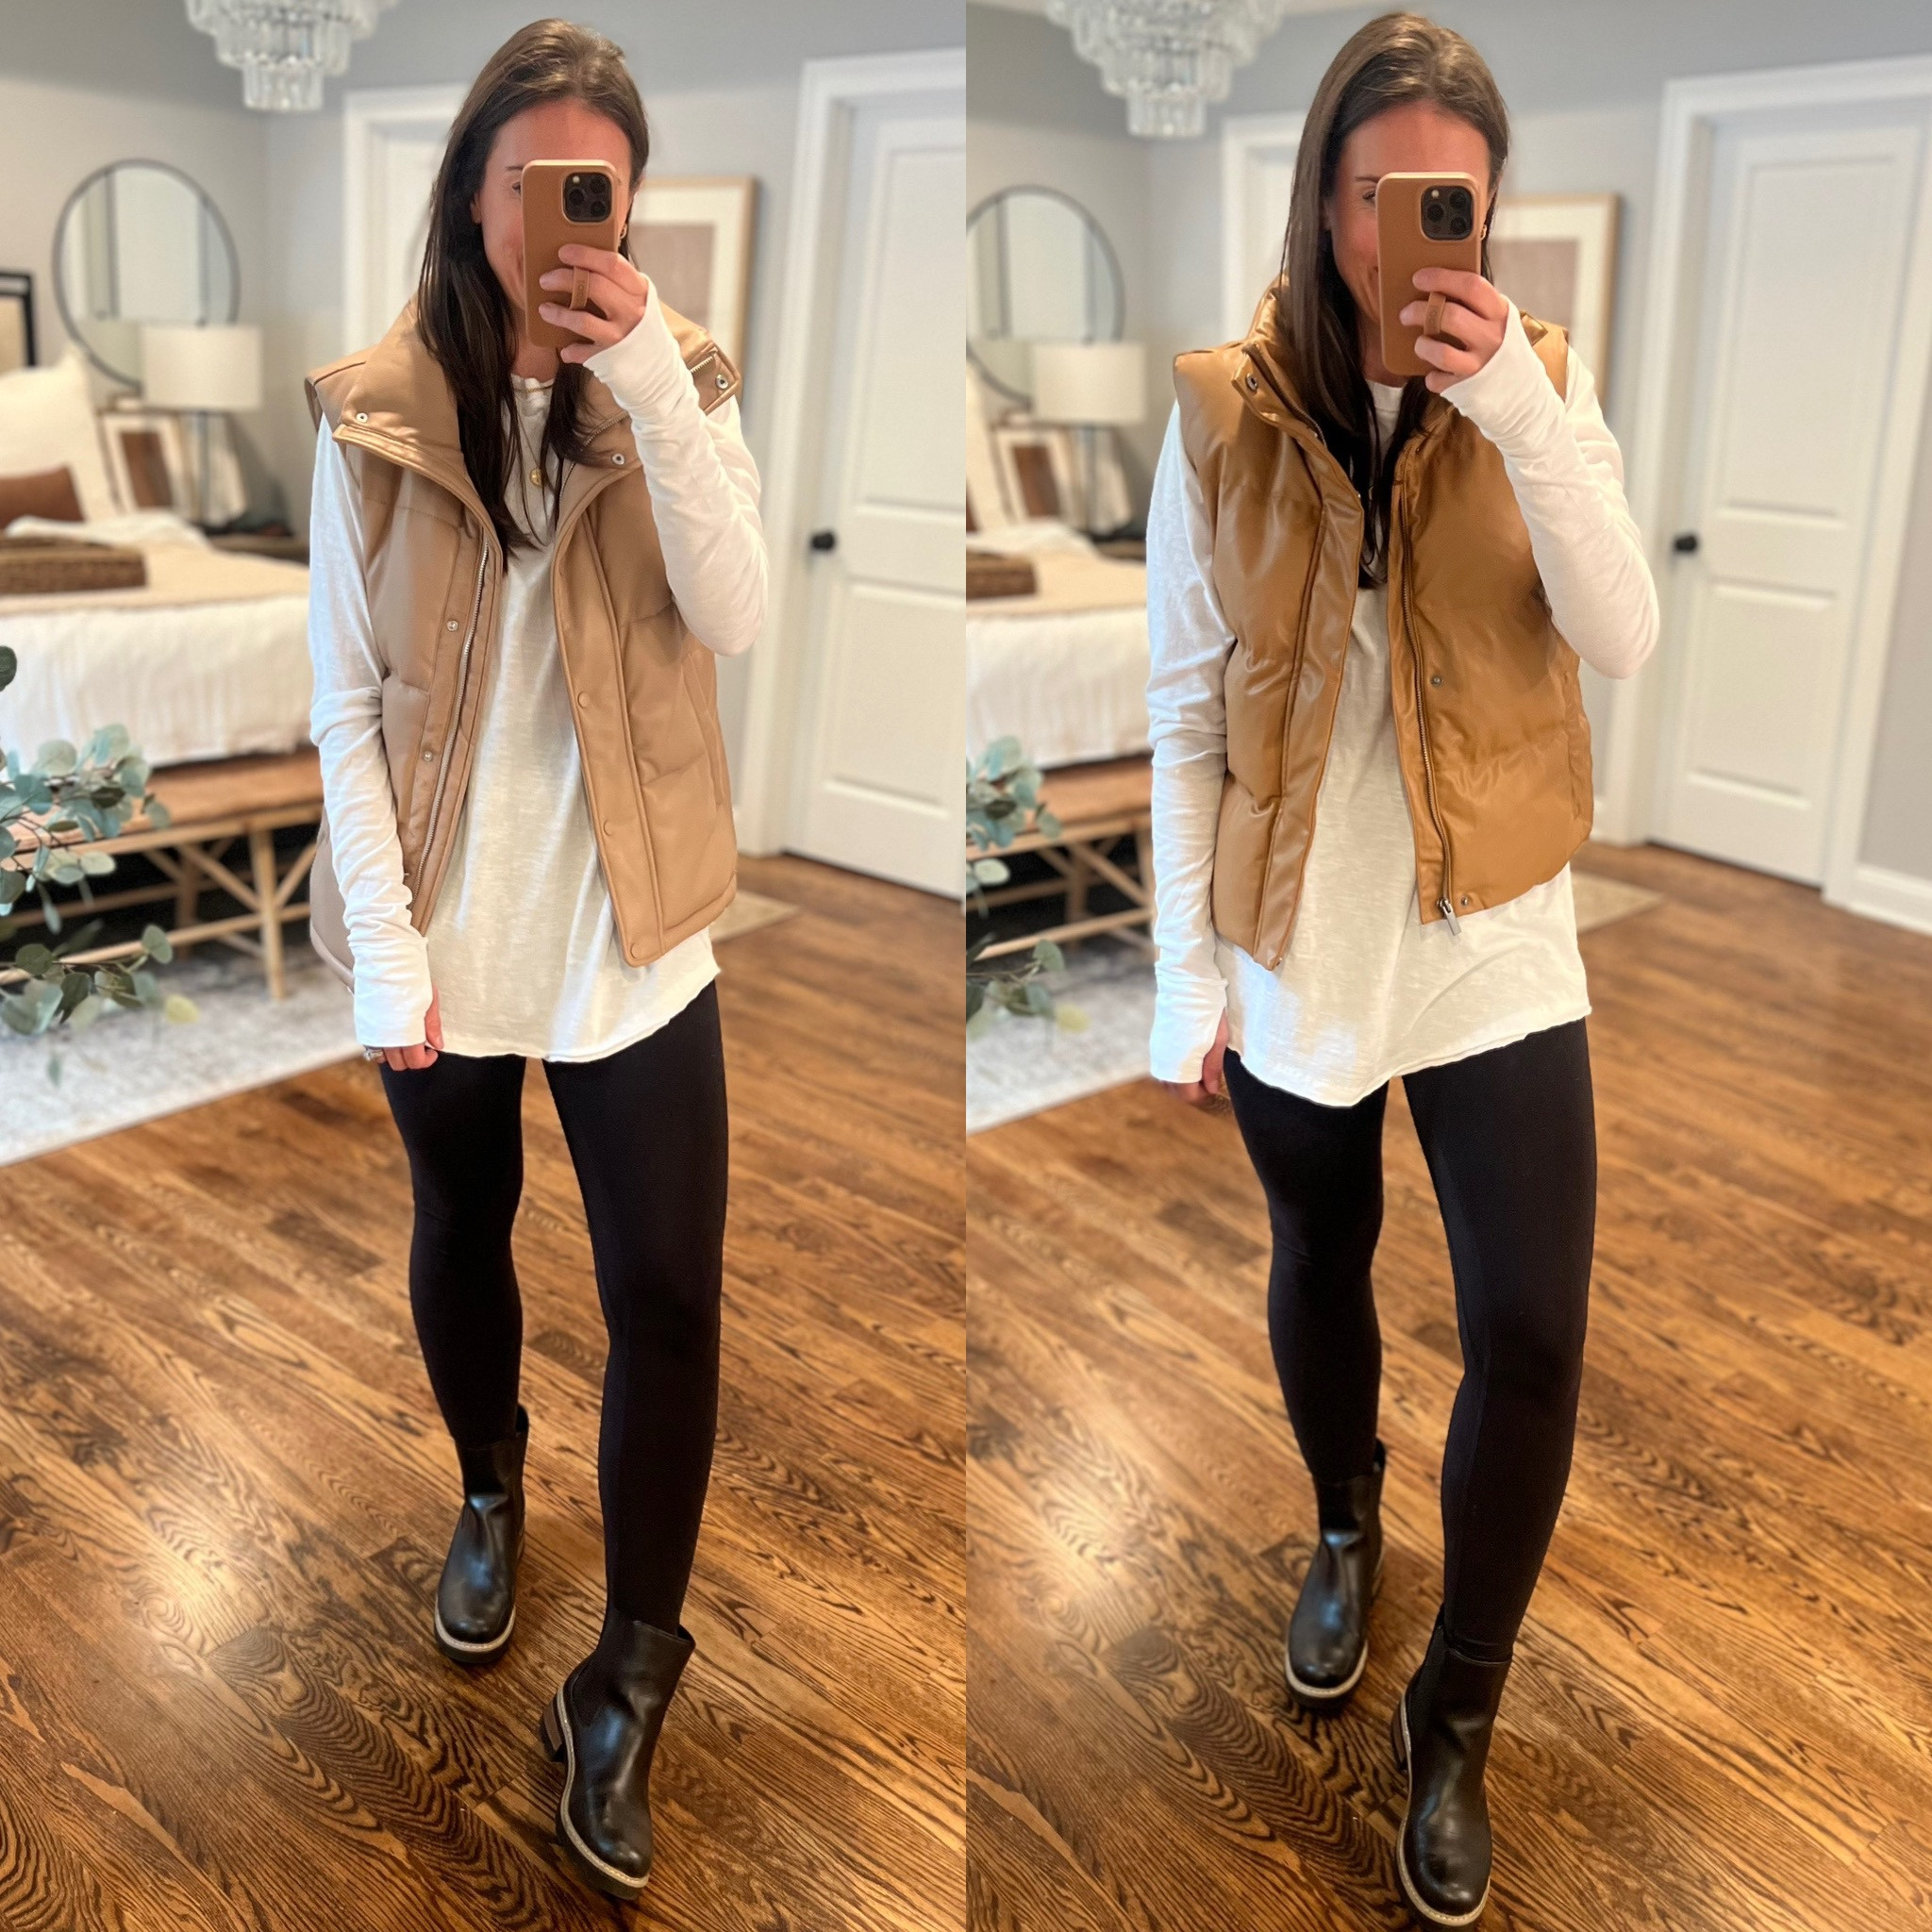 Puffer vests & flare leggings for the look today🎄🤗🎁 . . . . Puffer vest,  brown puffer vest, flare leggings, winter outfit i